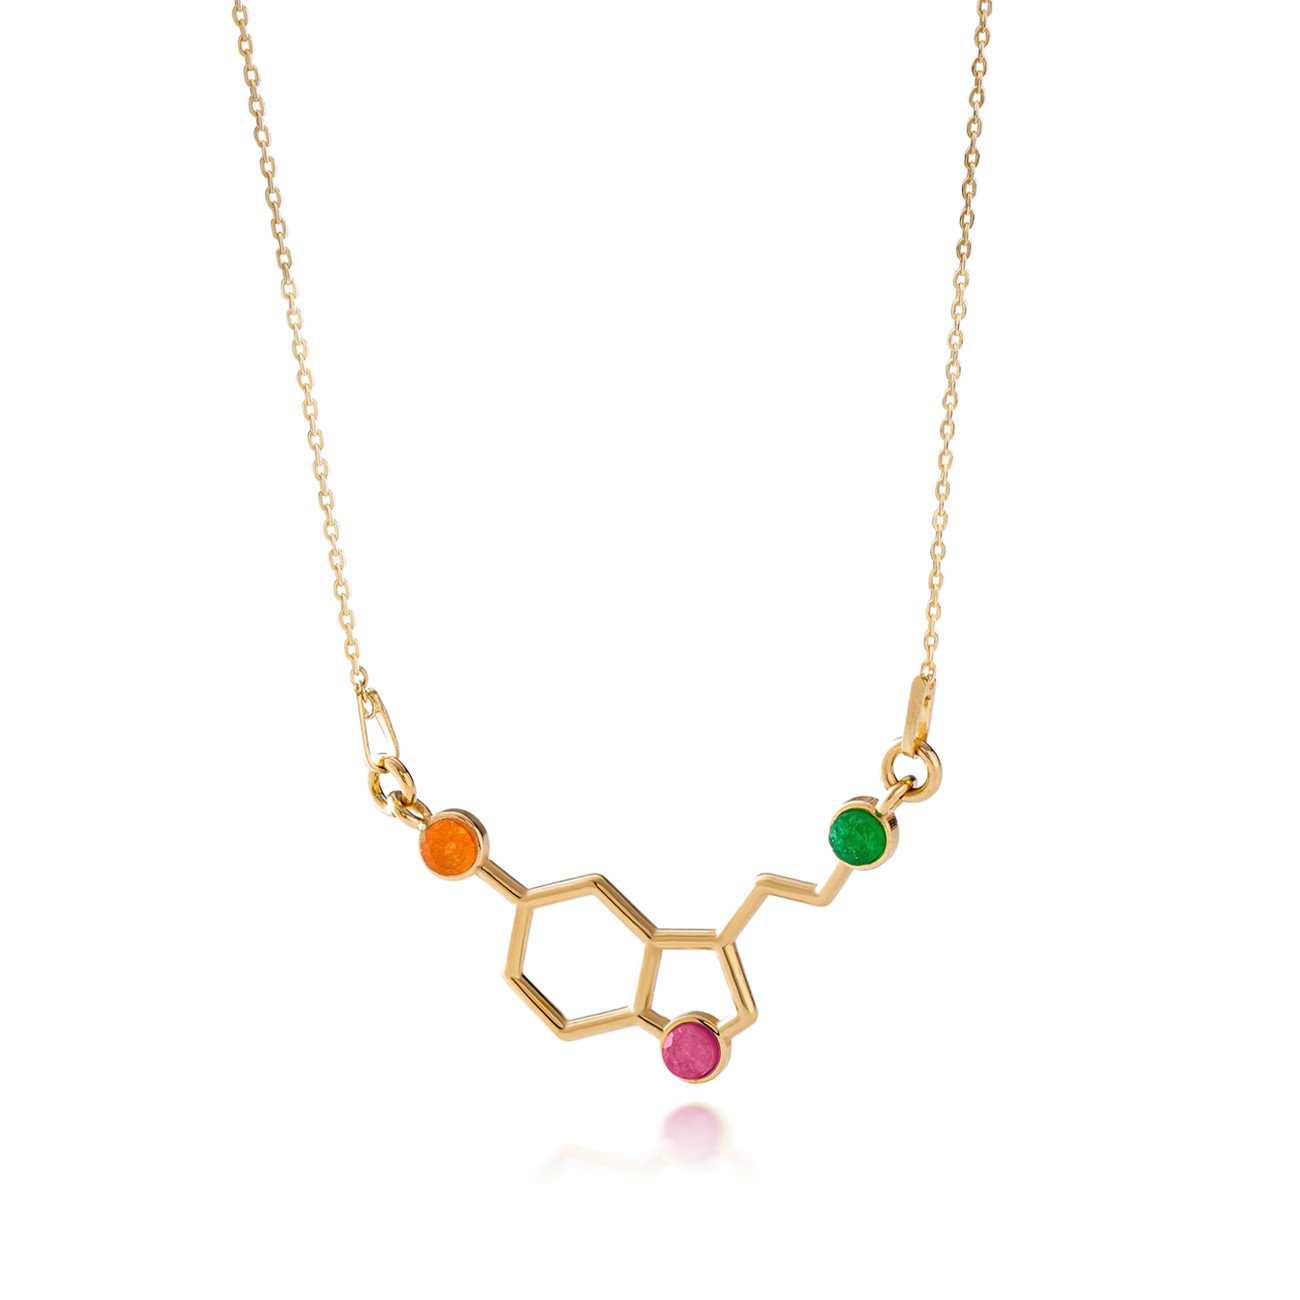 Giorre Woman's Necklace 378089